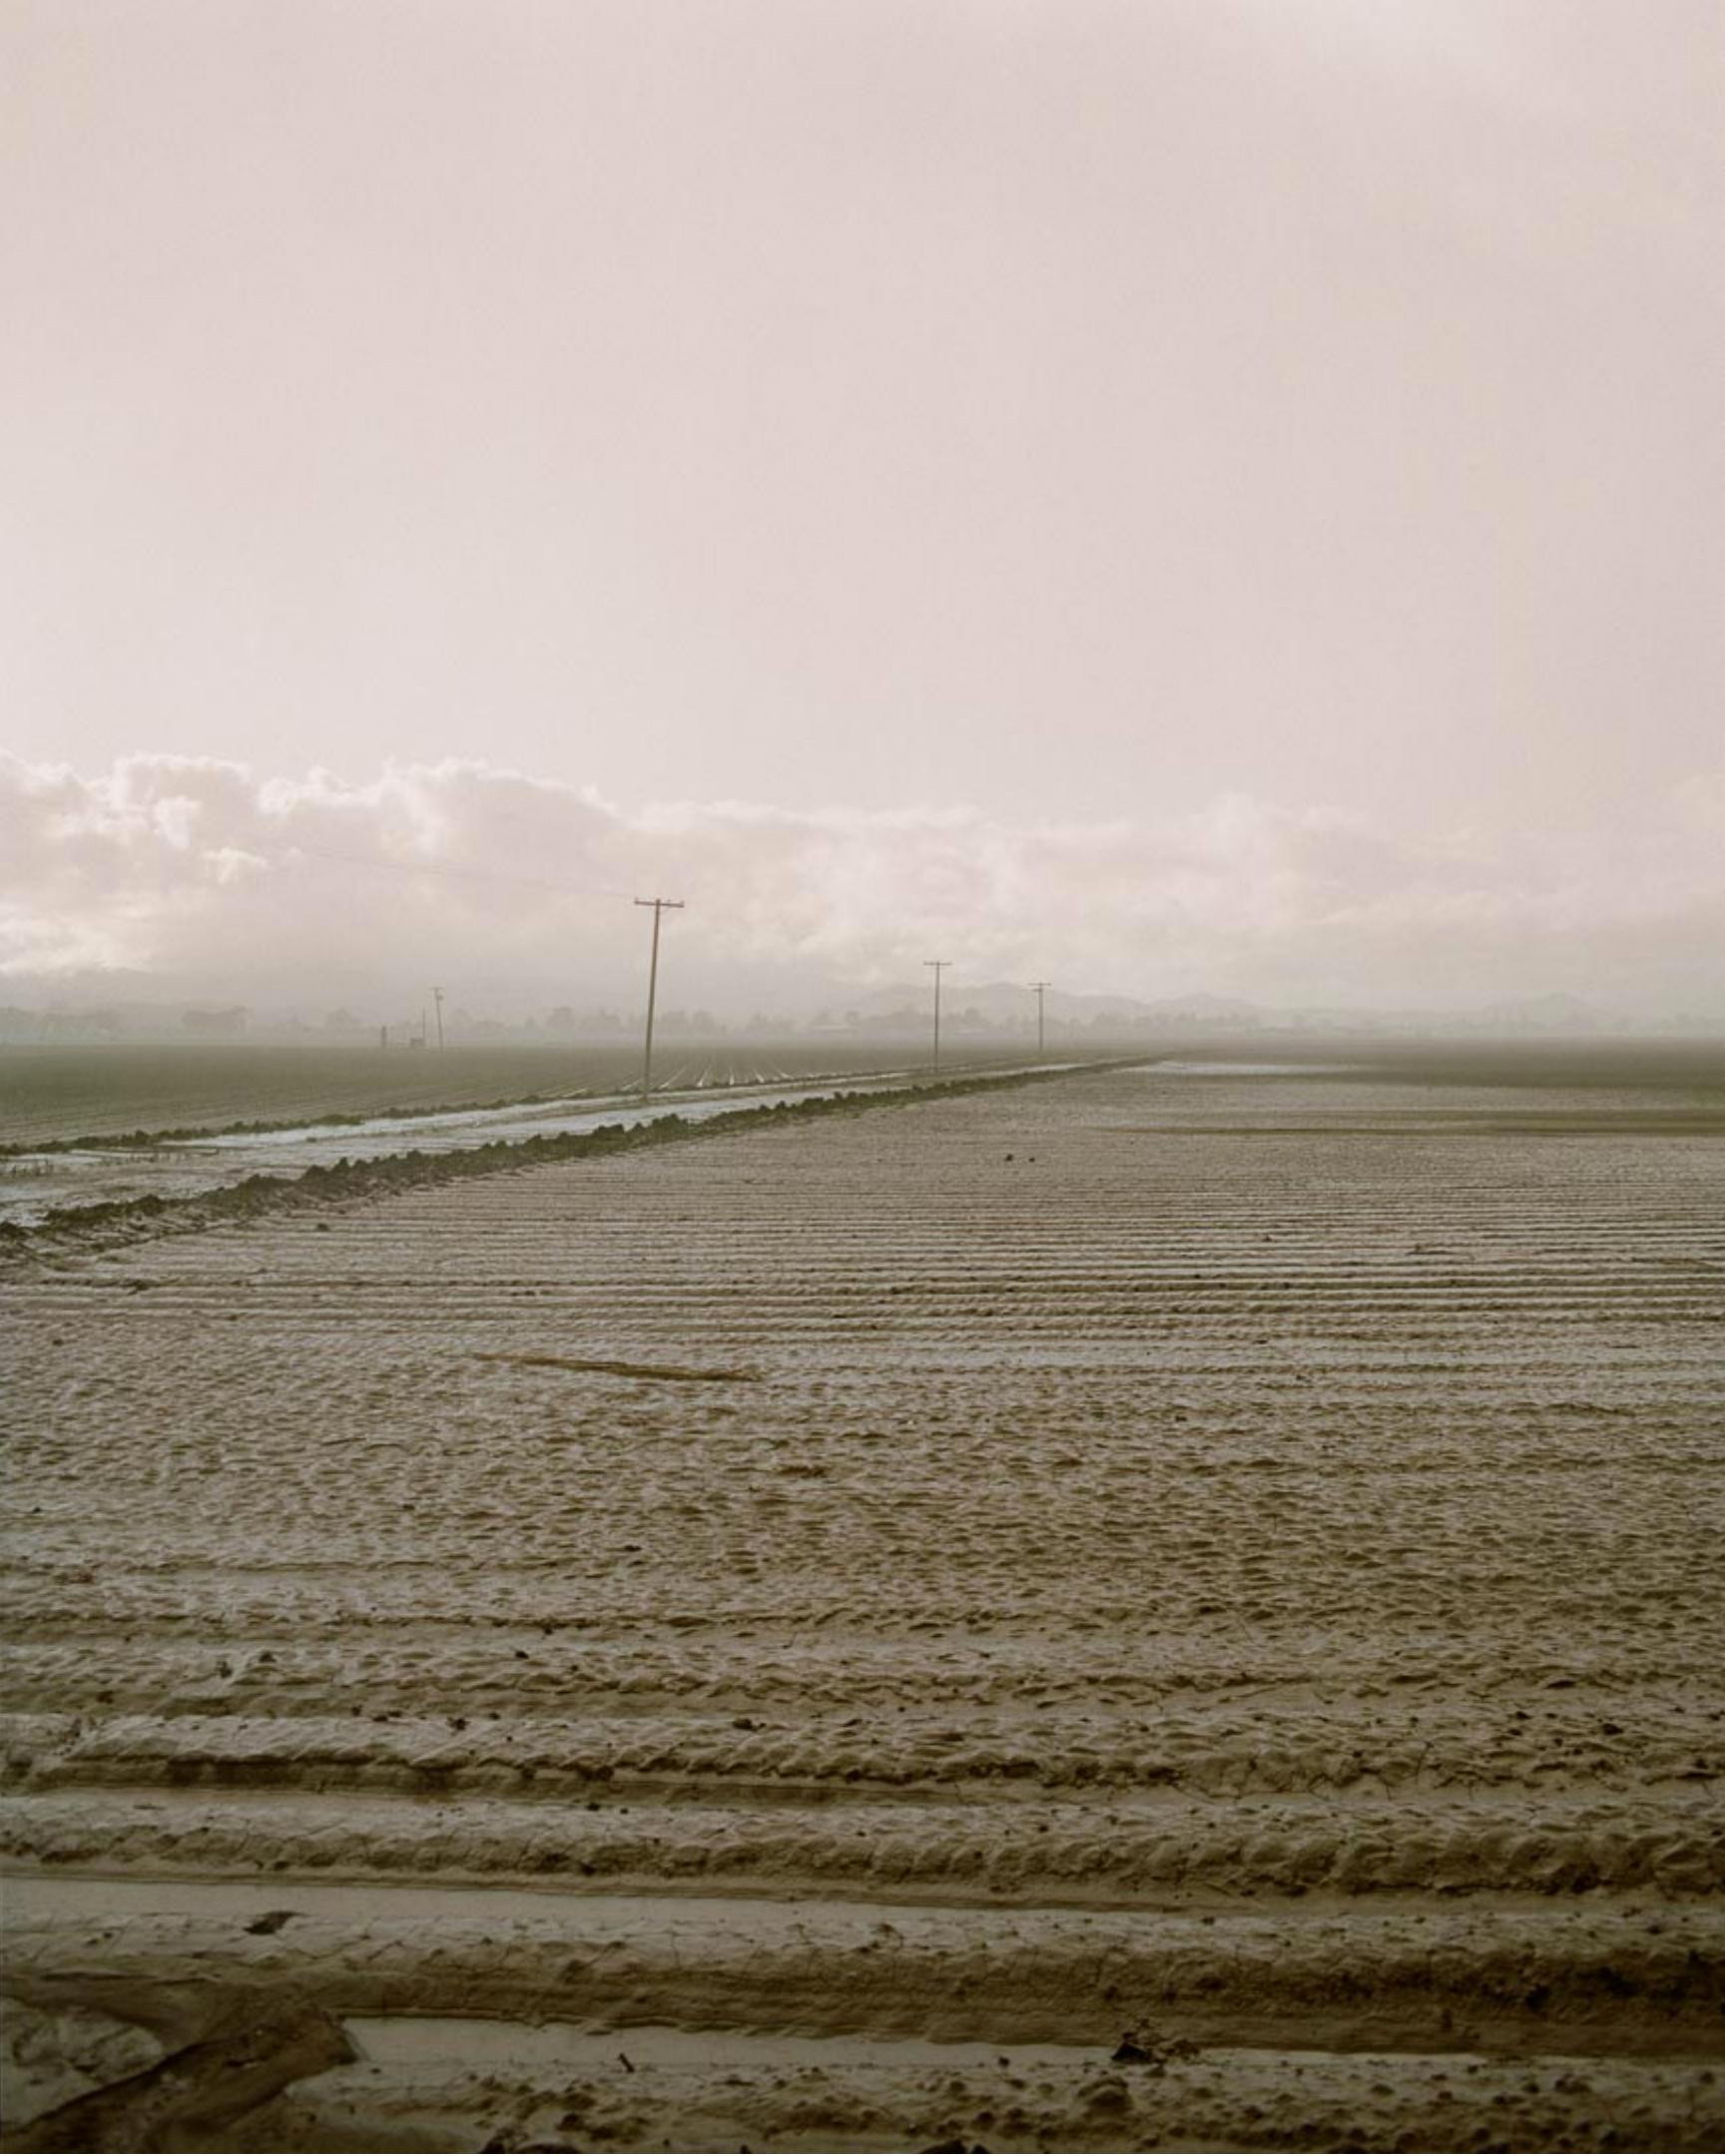 #1609-b, 1996 - Todd Hido (Colour Photography)
Signed, titled and dated on reverse
Archival pigment print

Available in three sizes:
14 x 11 inches, from an edition of 10 + 3 APs
24 x 20 inches, from an edition of 10 + 3 APs
38 x 30 inches, from an